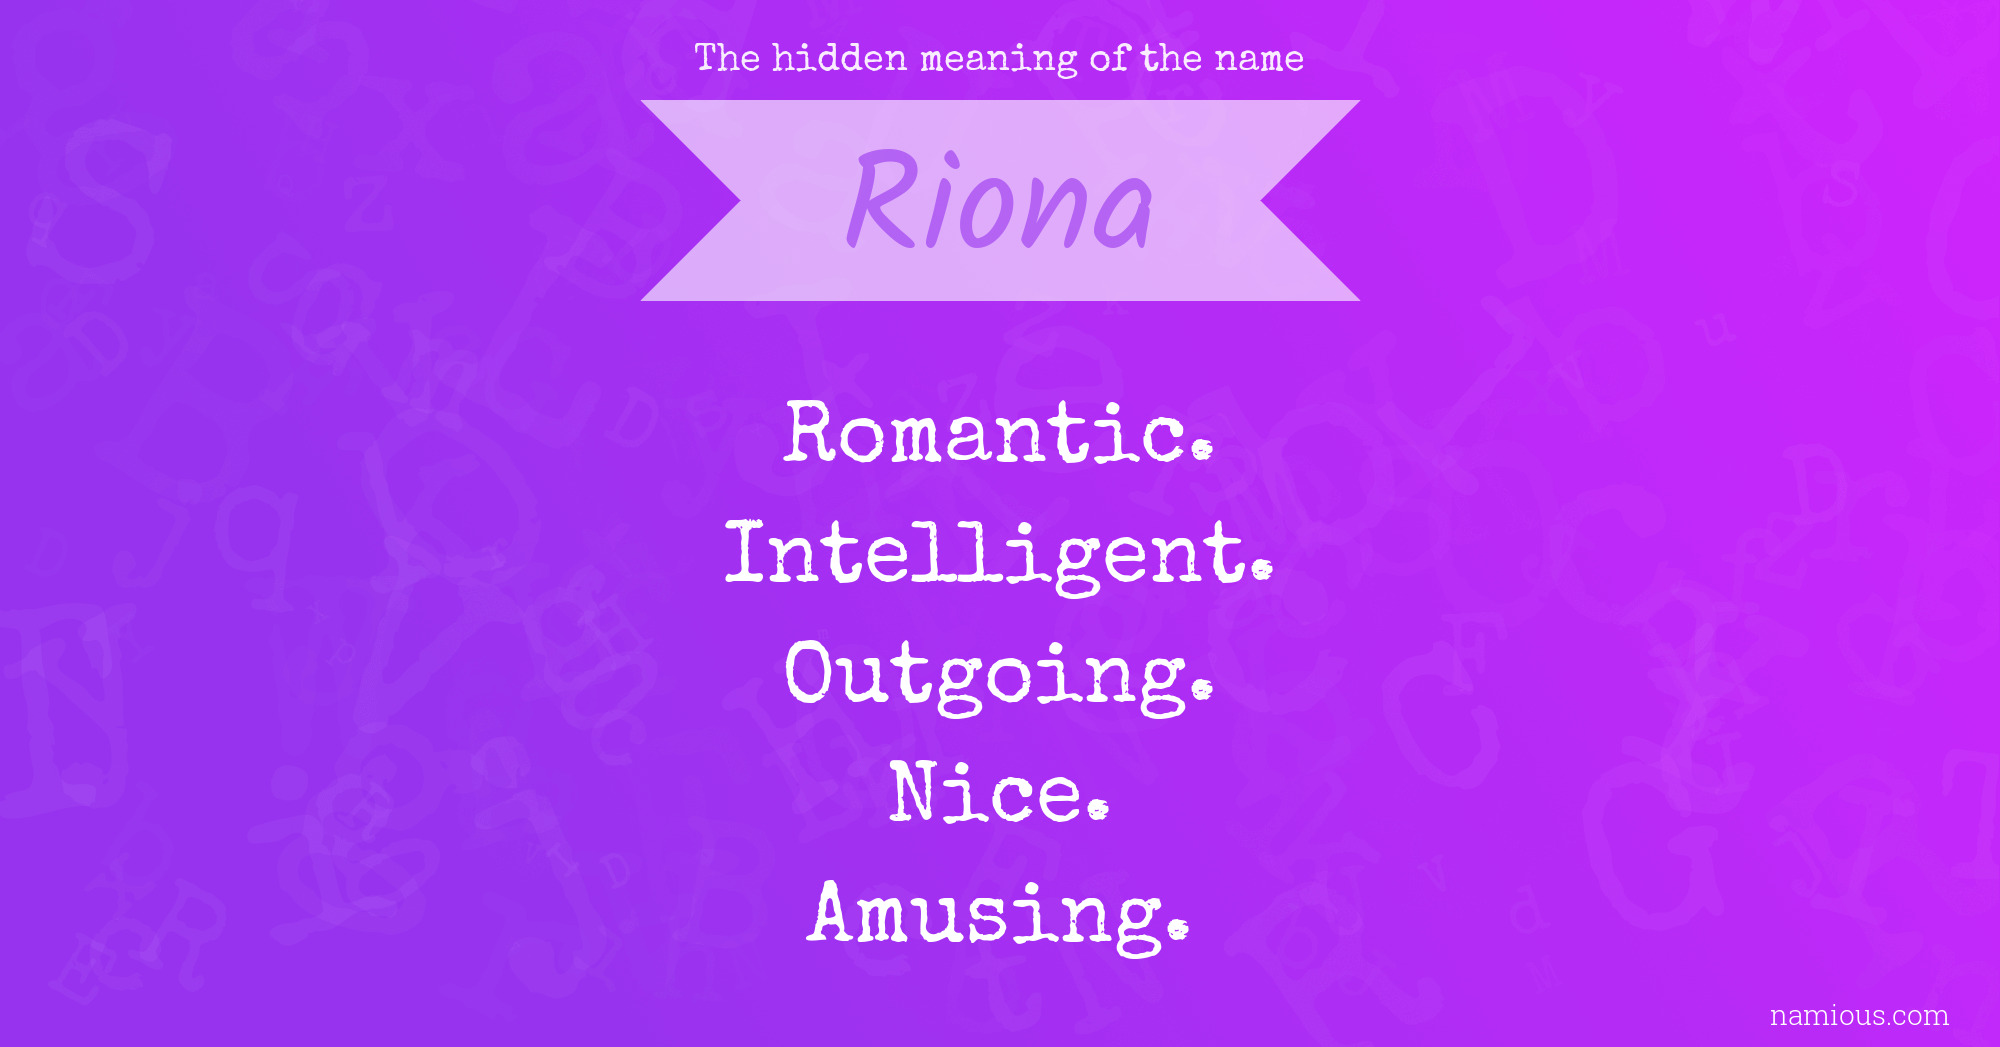 The hidden meaning of the name Riona